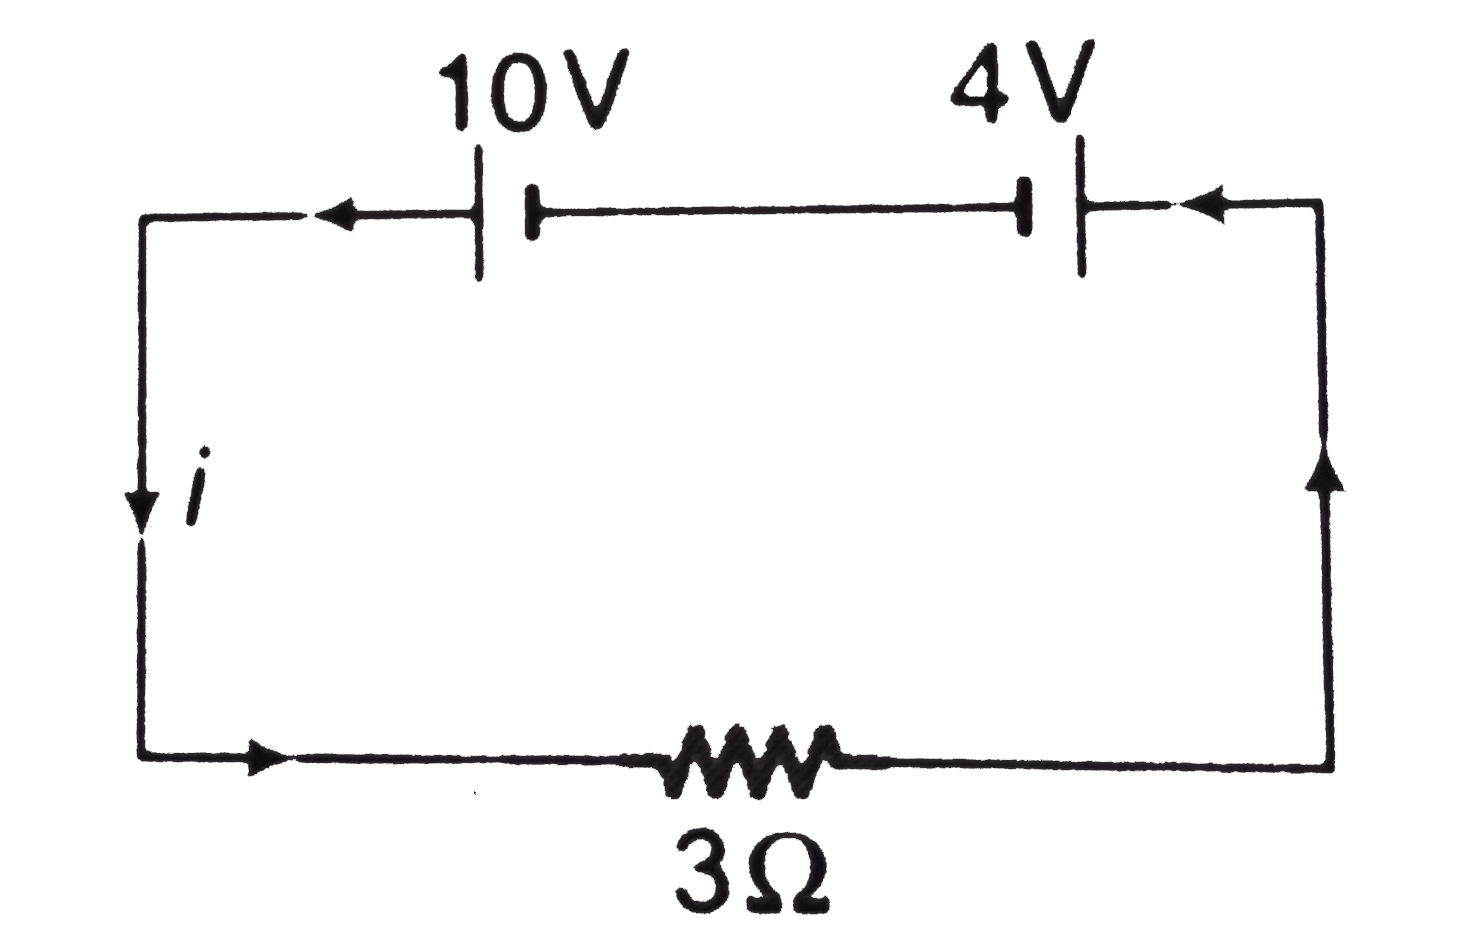 In the circuit shown in figure find      a. The power supplied by 10 V battery   b. The power consumed by 4 V battery and   c. The power dissipated in 3Omega resistance.